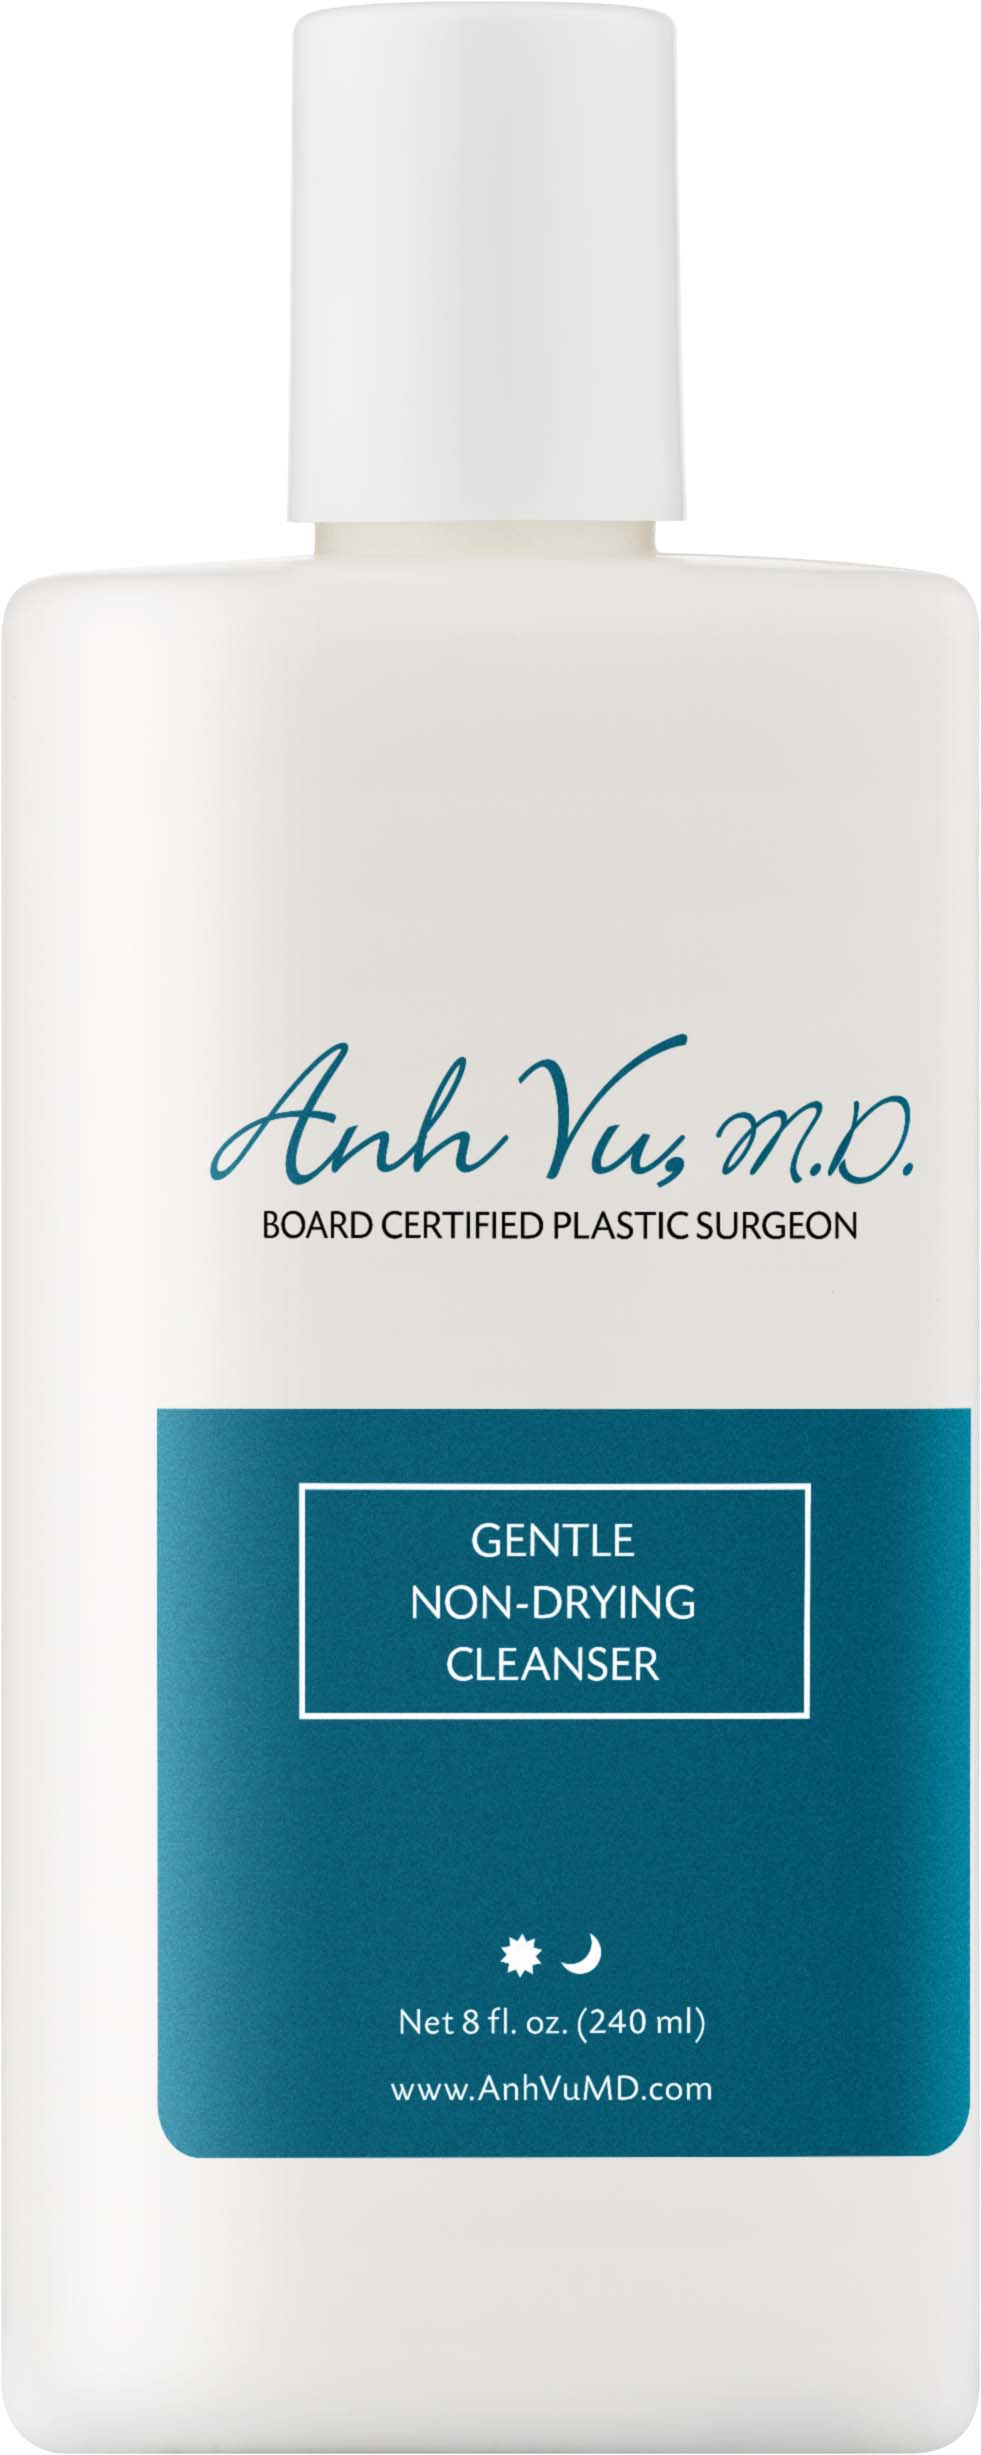 GENTLE NON-DRYING CLEANSER